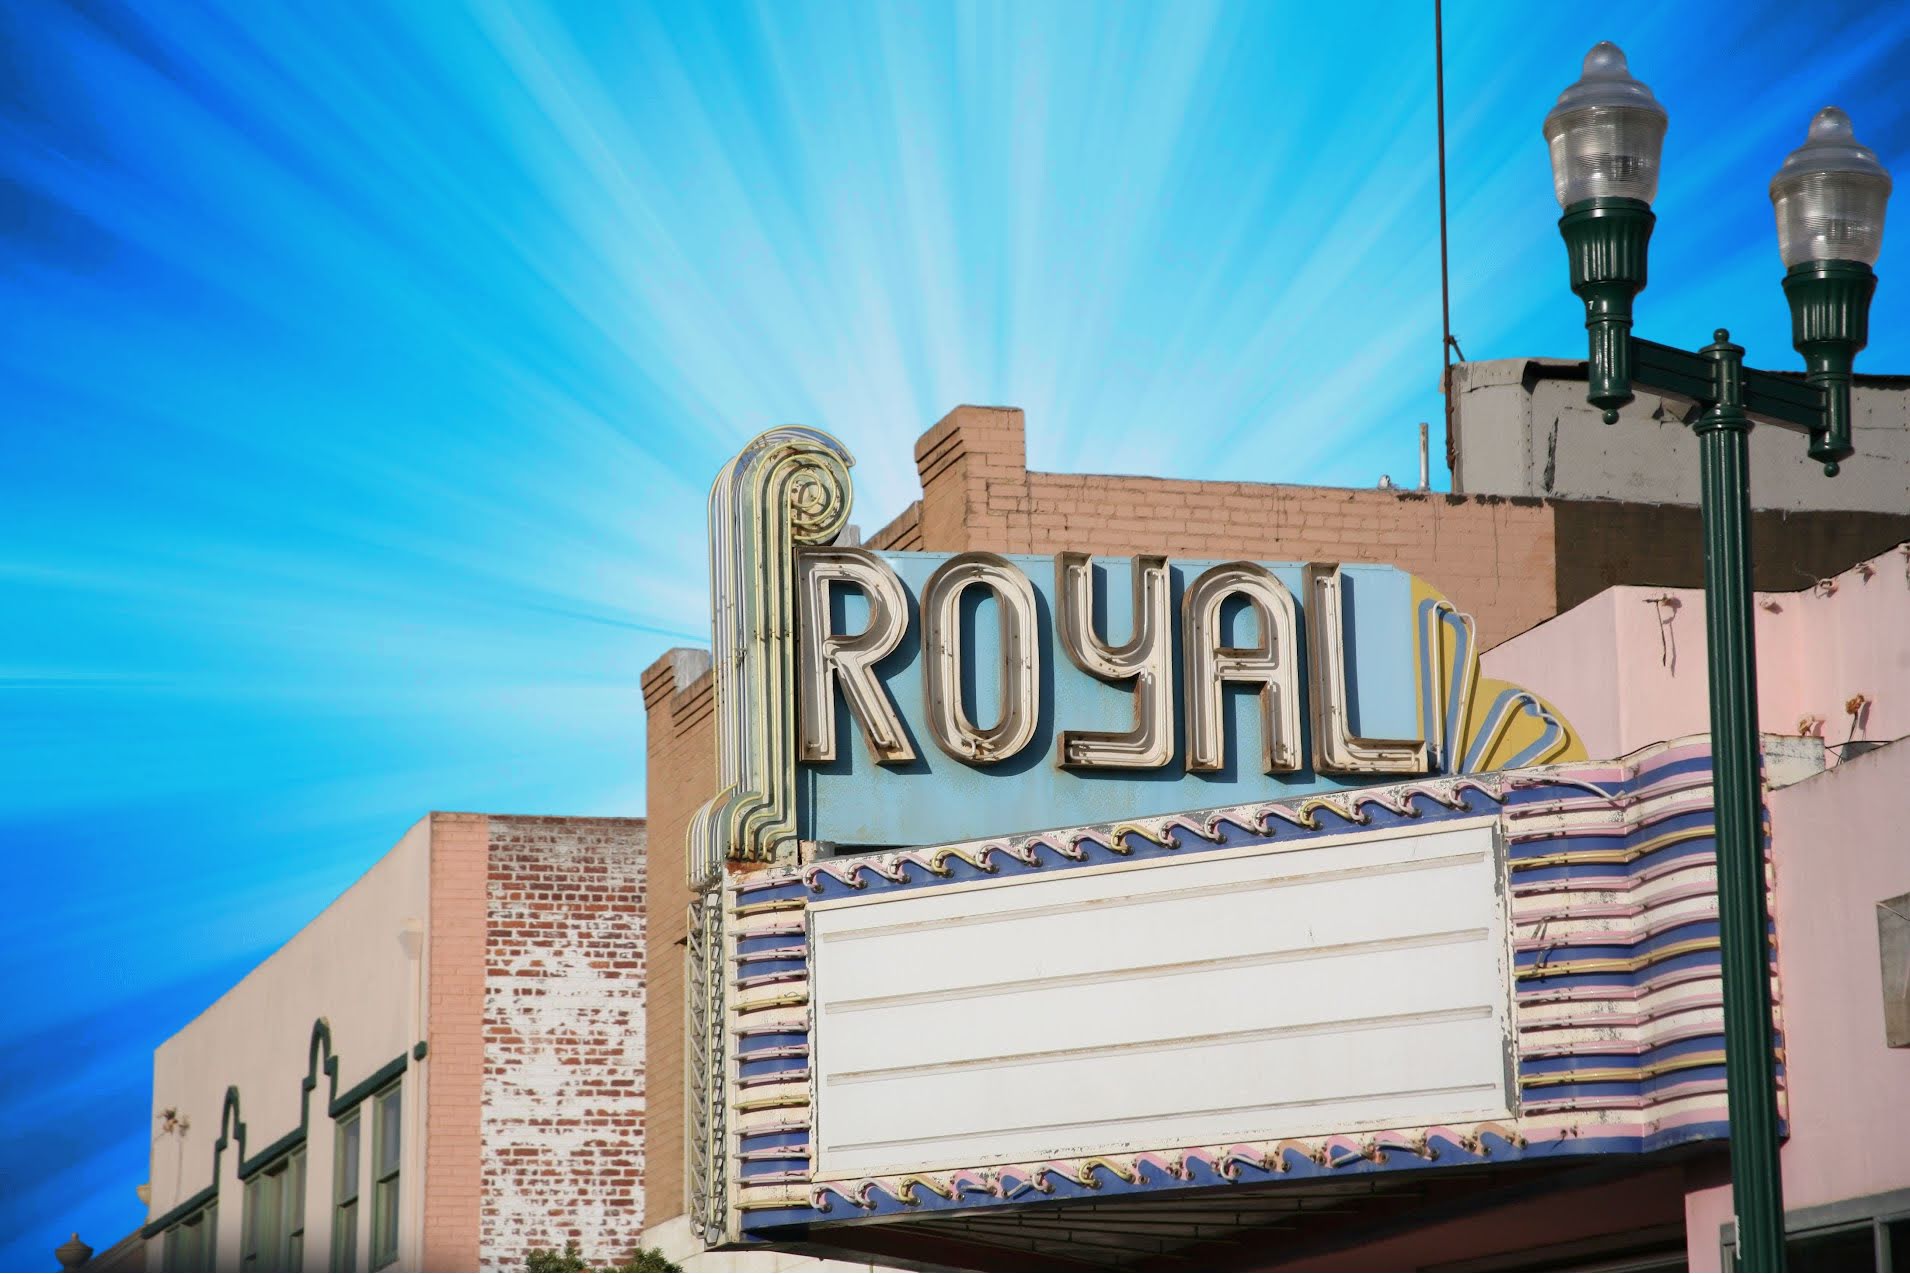 Ahead of Its Time: The Royal Theater in California Offered Spanish-Language Films in the ‘60s nuestro stories